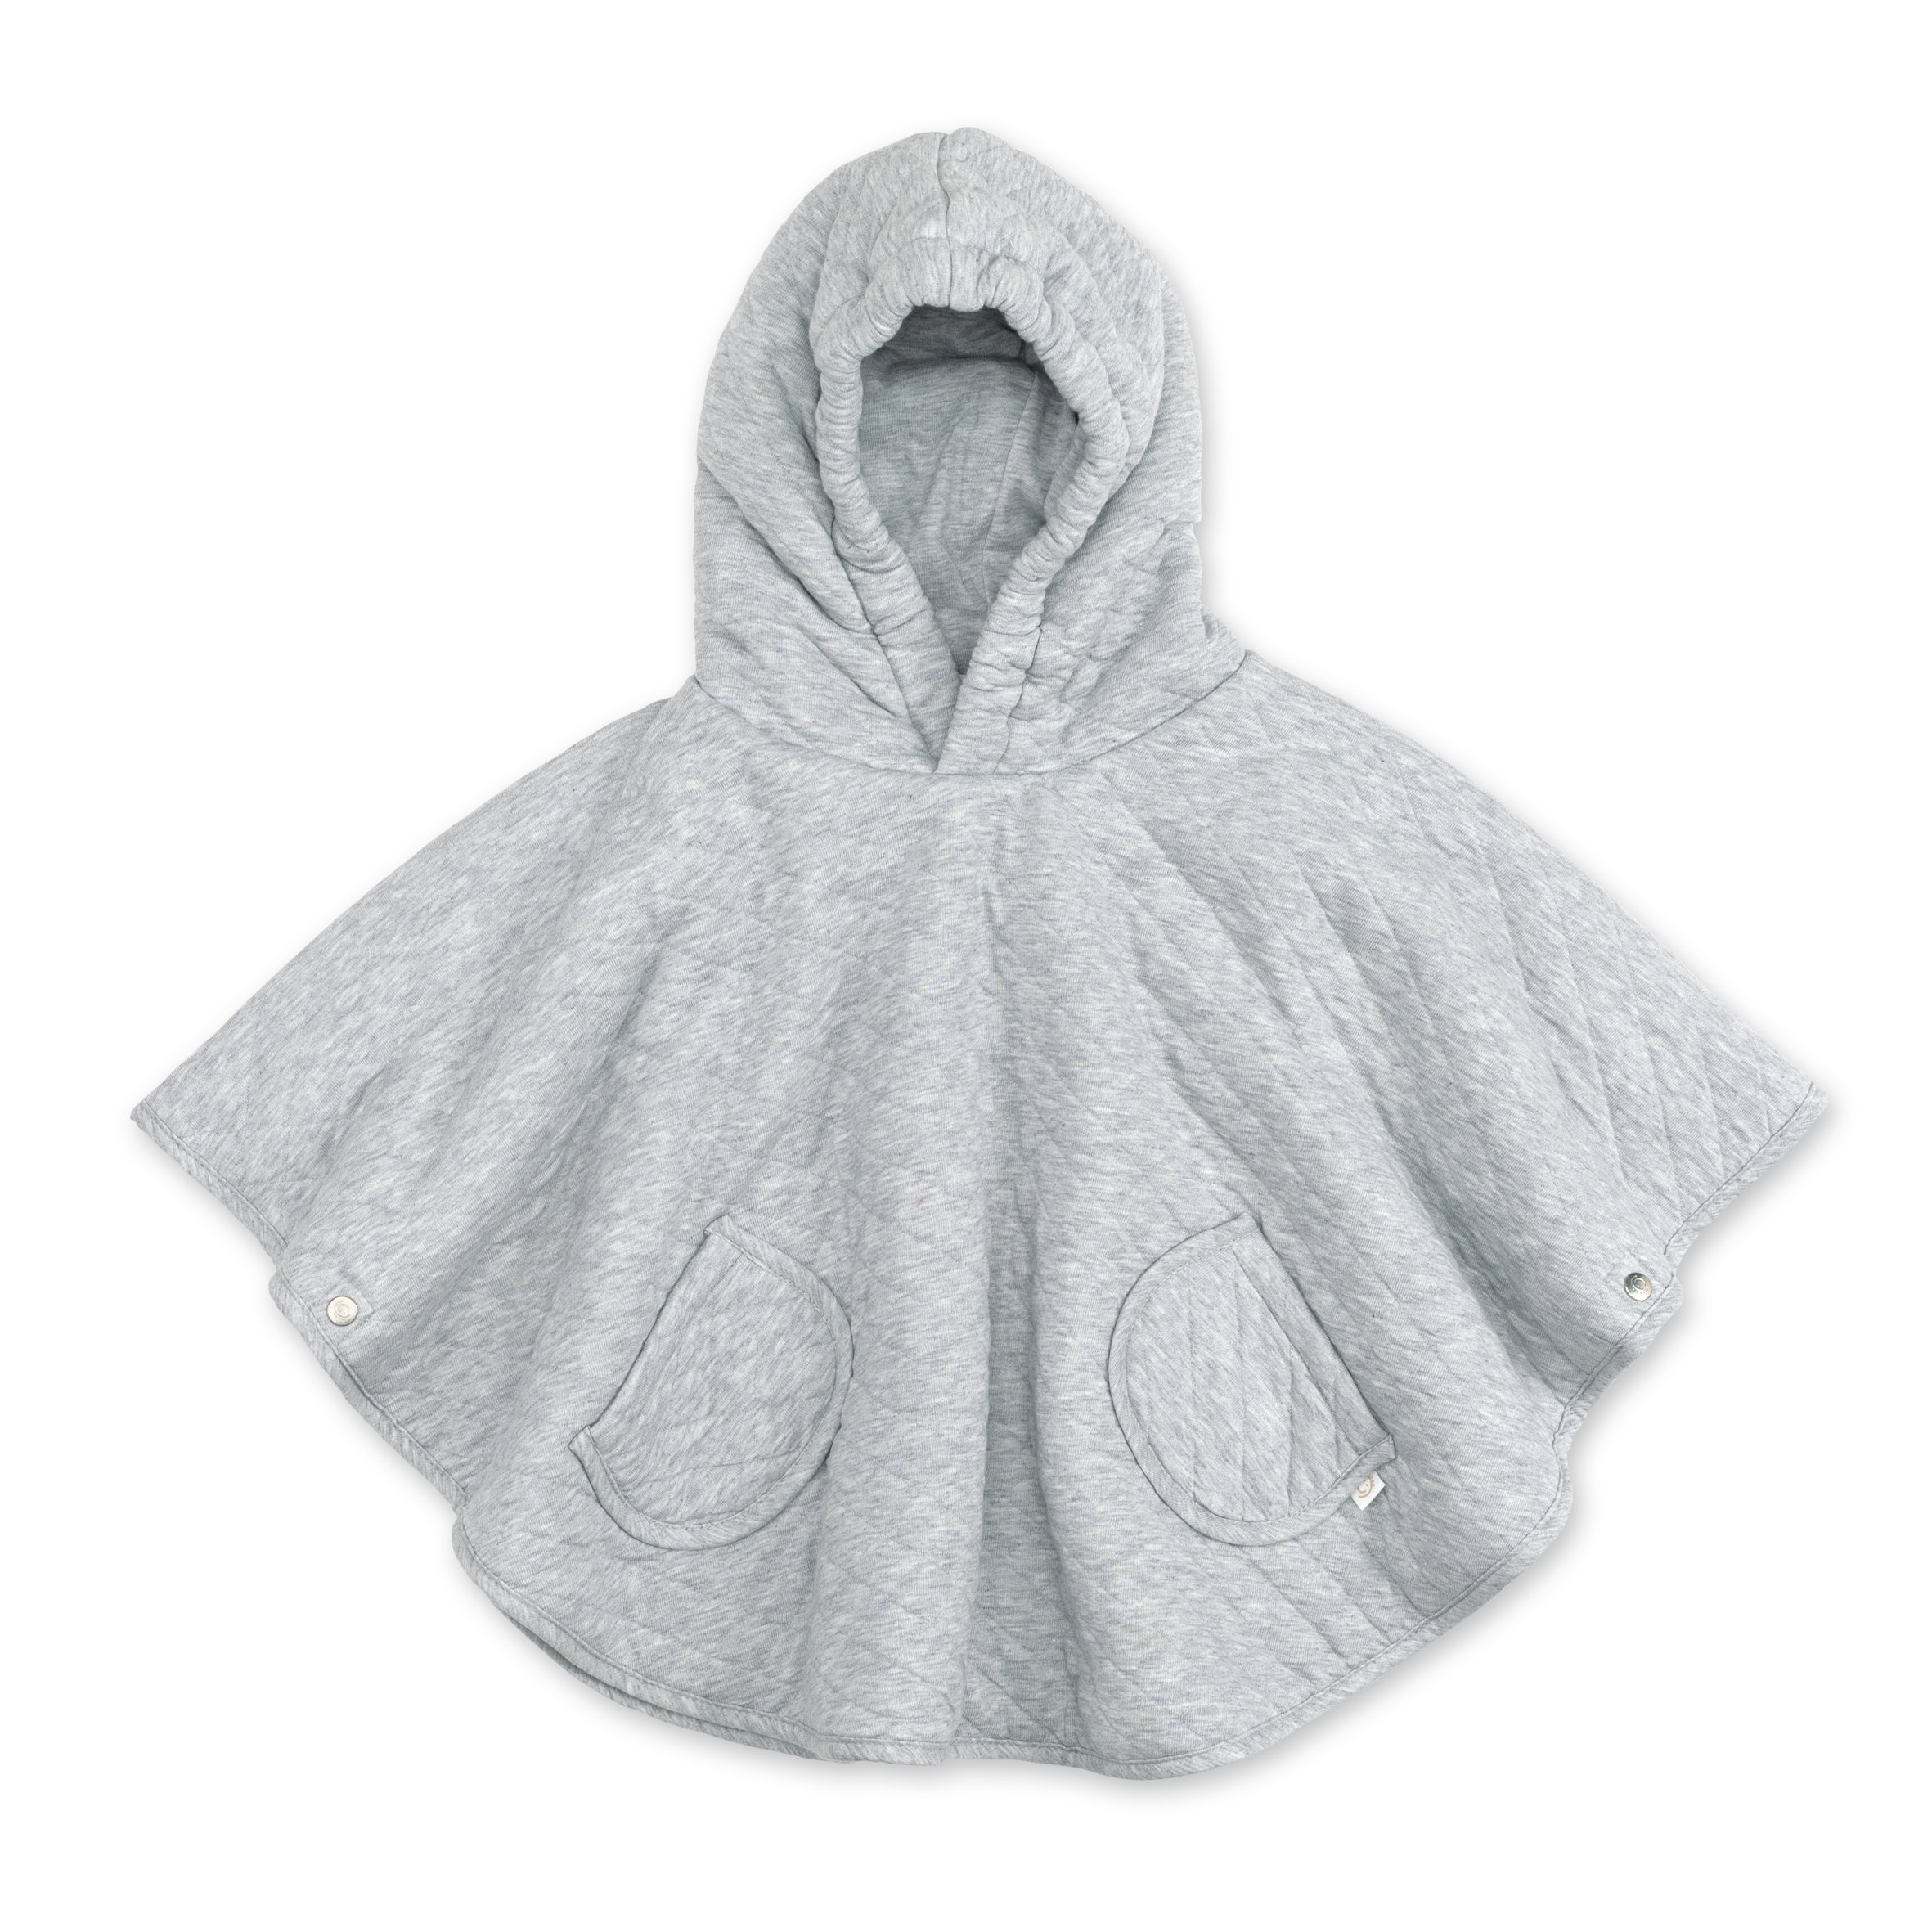 Reiseponcho Pady Quilted + jersey 9-36m QUILT Mix grey